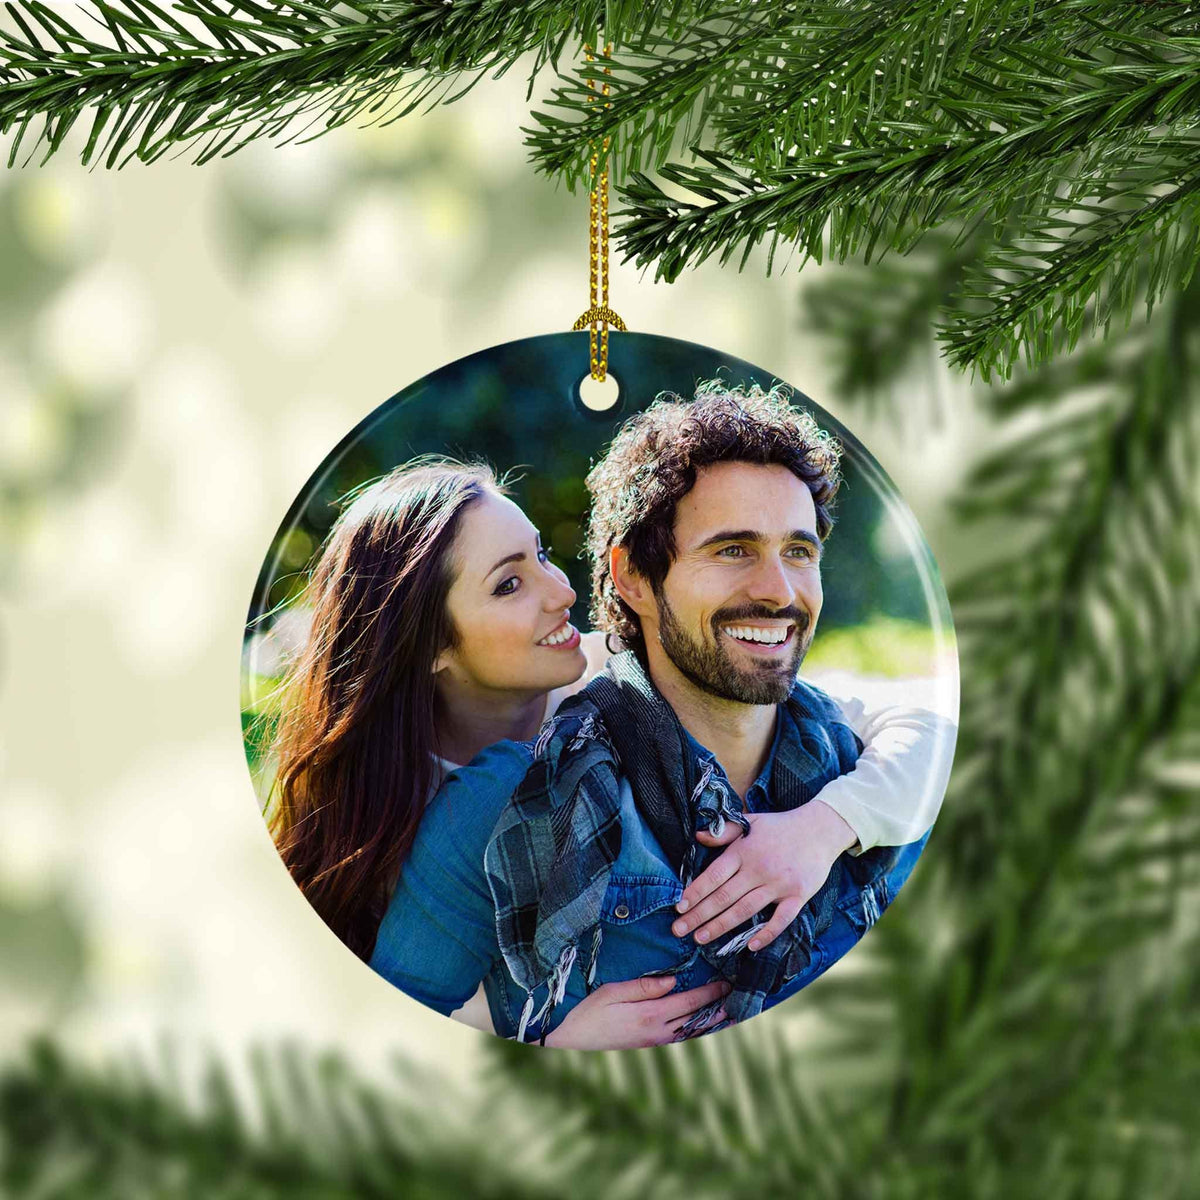 Photo Holiday Ornaments | Personalized Christmas Ornaments | First Christmas Engaged Buffalo Plaid Round